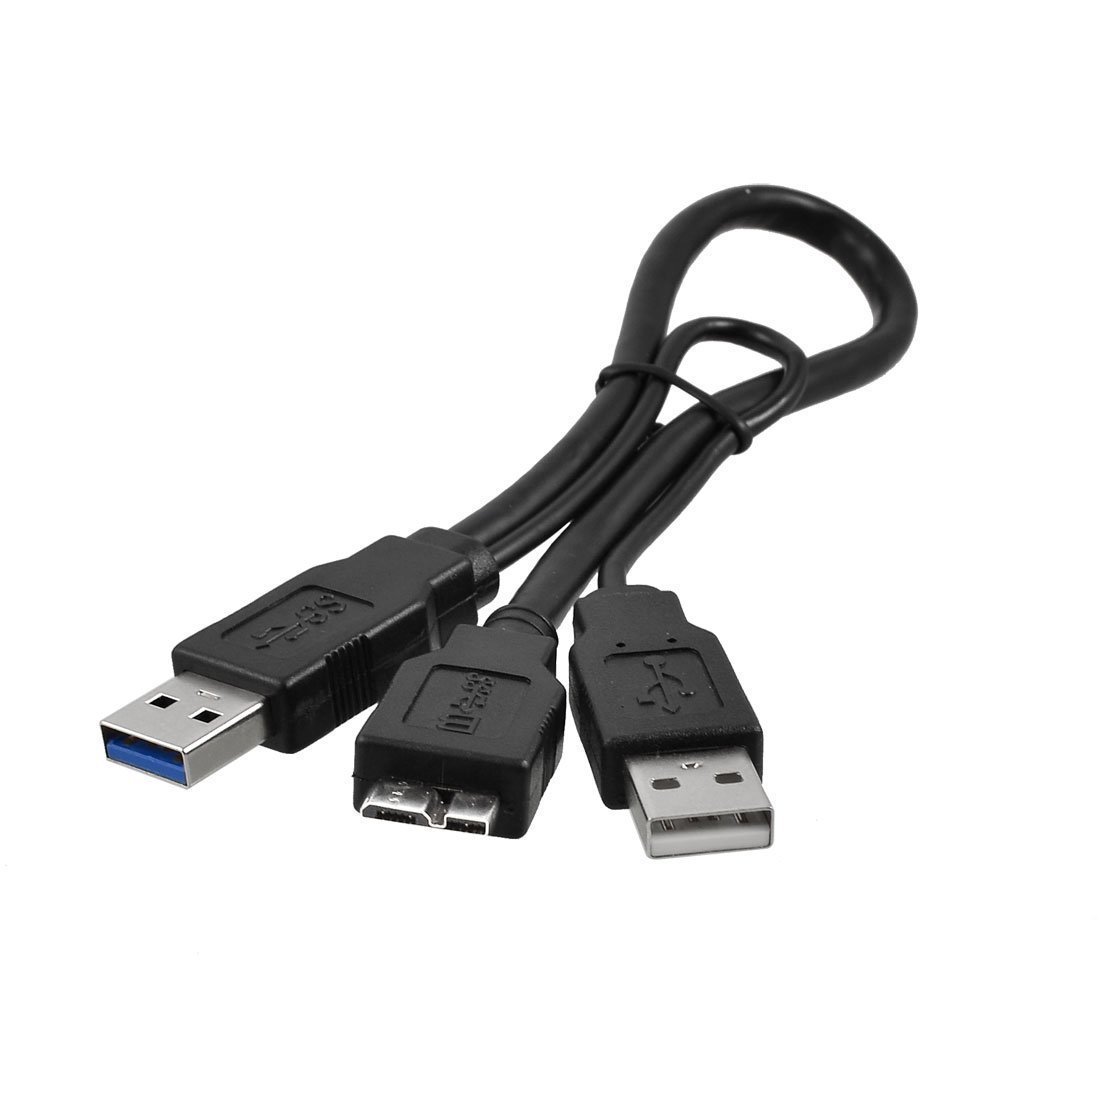 Dual USB 3.0 Type A to Micro-B USB Y Shape High Speed Cable for External Hard Drives/Seagate/Toshiba/WD/Hitachi/Samsung/Wii-U/Note 3 (21 Inches) - image 2 of 2